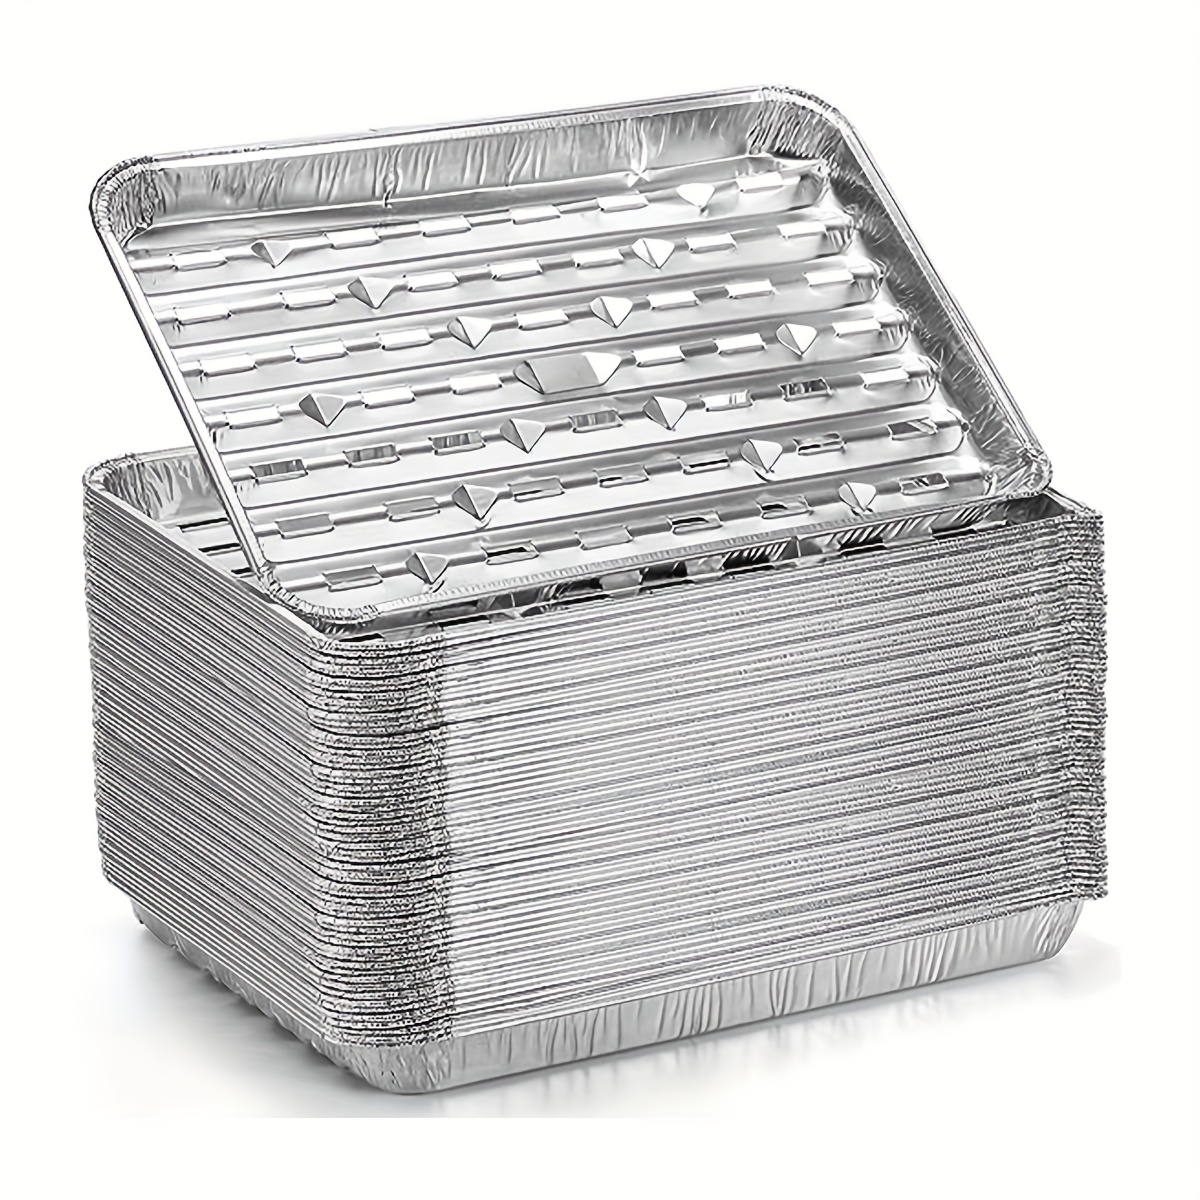 Small Aluminum Pans with Lids(40 Pack - 5×4) 1 LB Capacity Tin